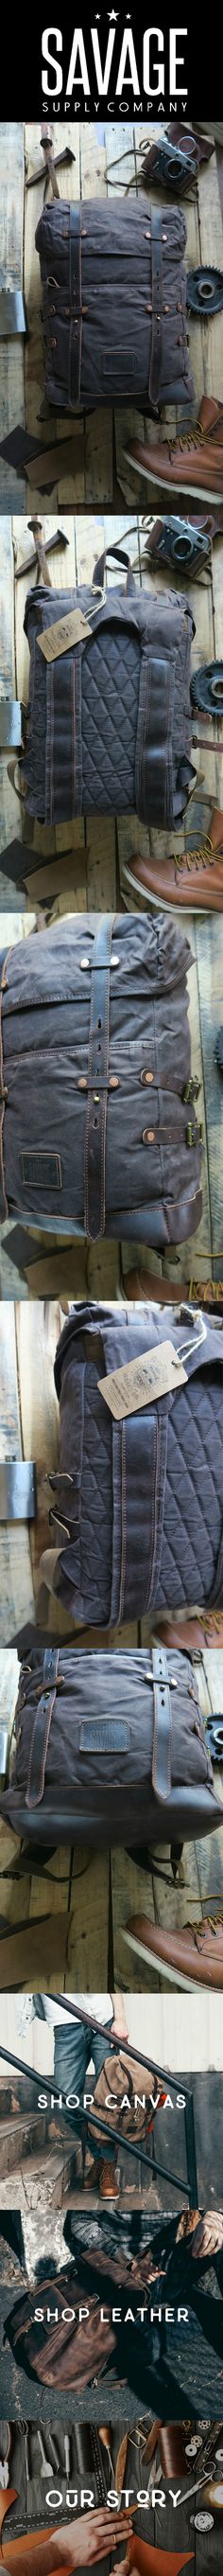 Waxed canvas adventure camping/hiking backpack.